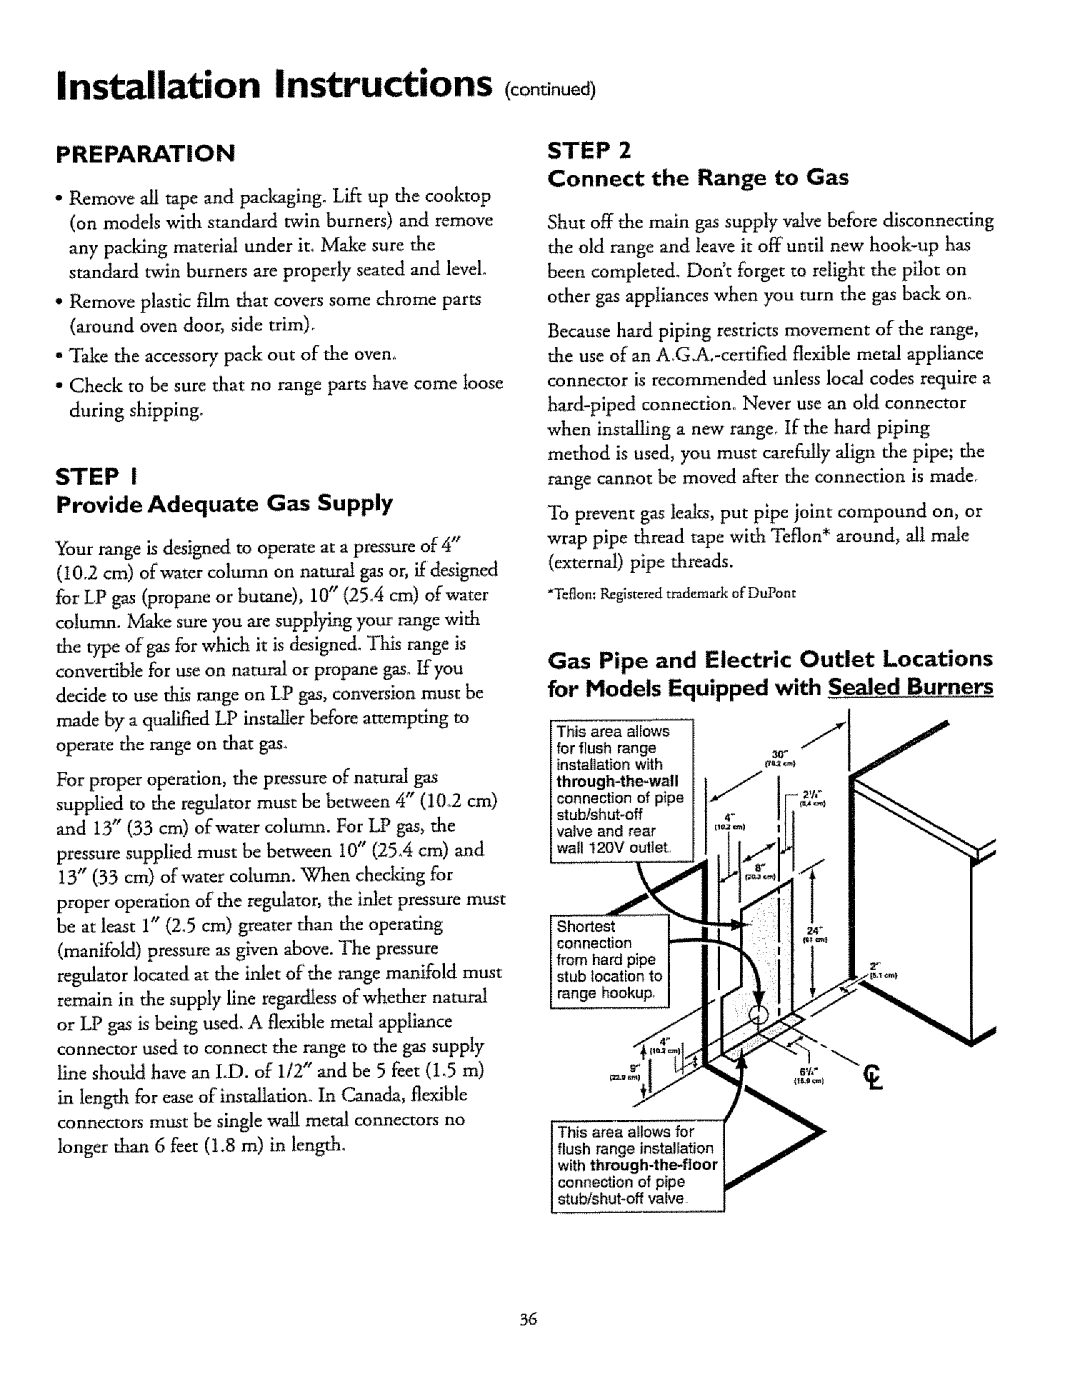 Sears 72676, 72671, 72675, 75471, 72678 Installation instructions continued, Preparation, STEP Provide Adequate Gas Supply 